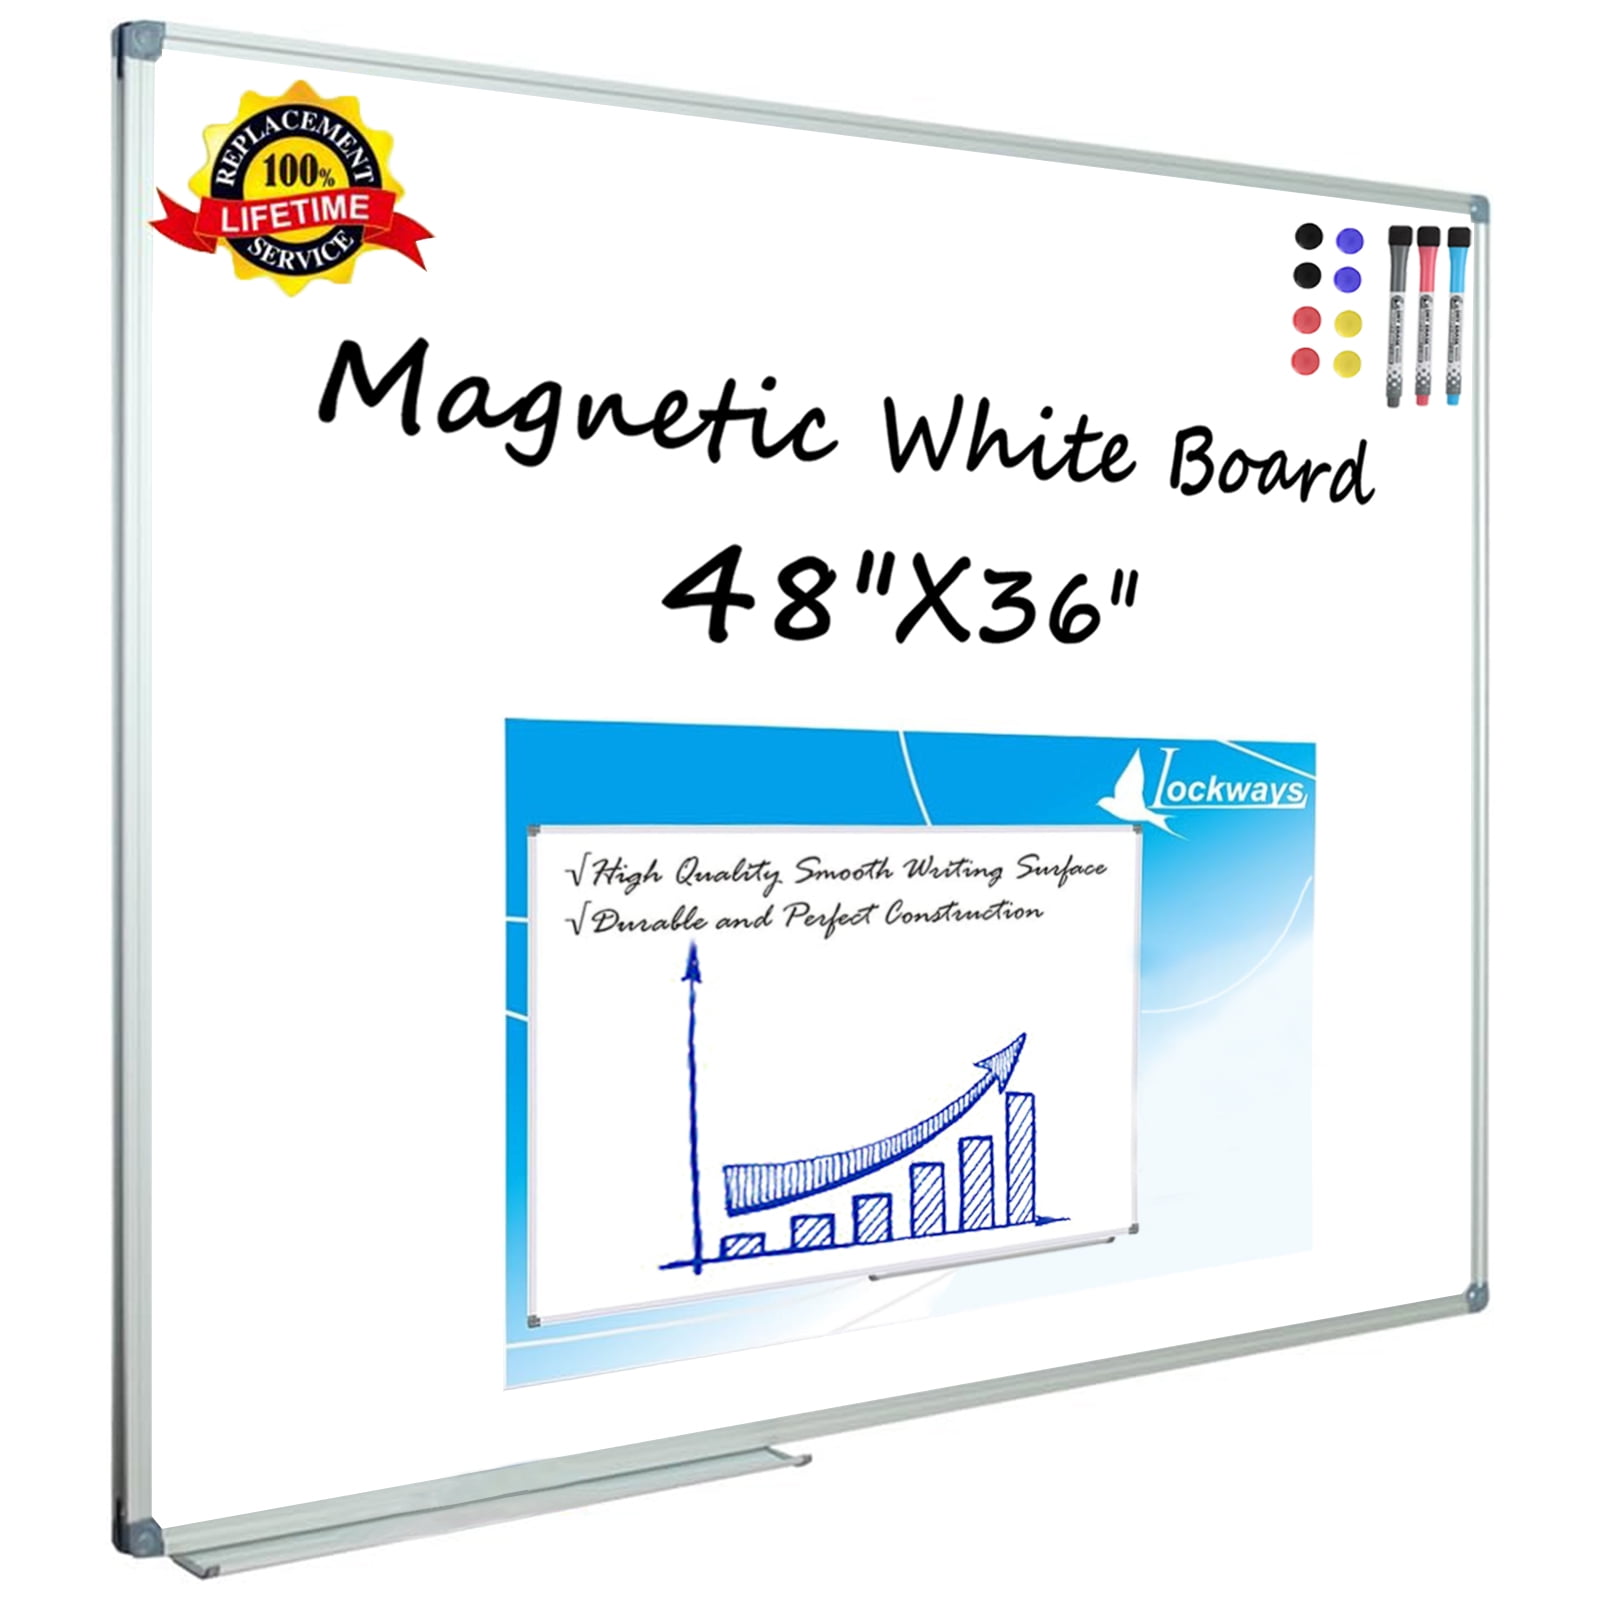 BENTISM Mobile Magnetic Whiteboard Dry Erase Board w/ Stand 36 x 24  Double Sided with Height Adjustable Aluminum Frame and 360 Reversible  Rolling